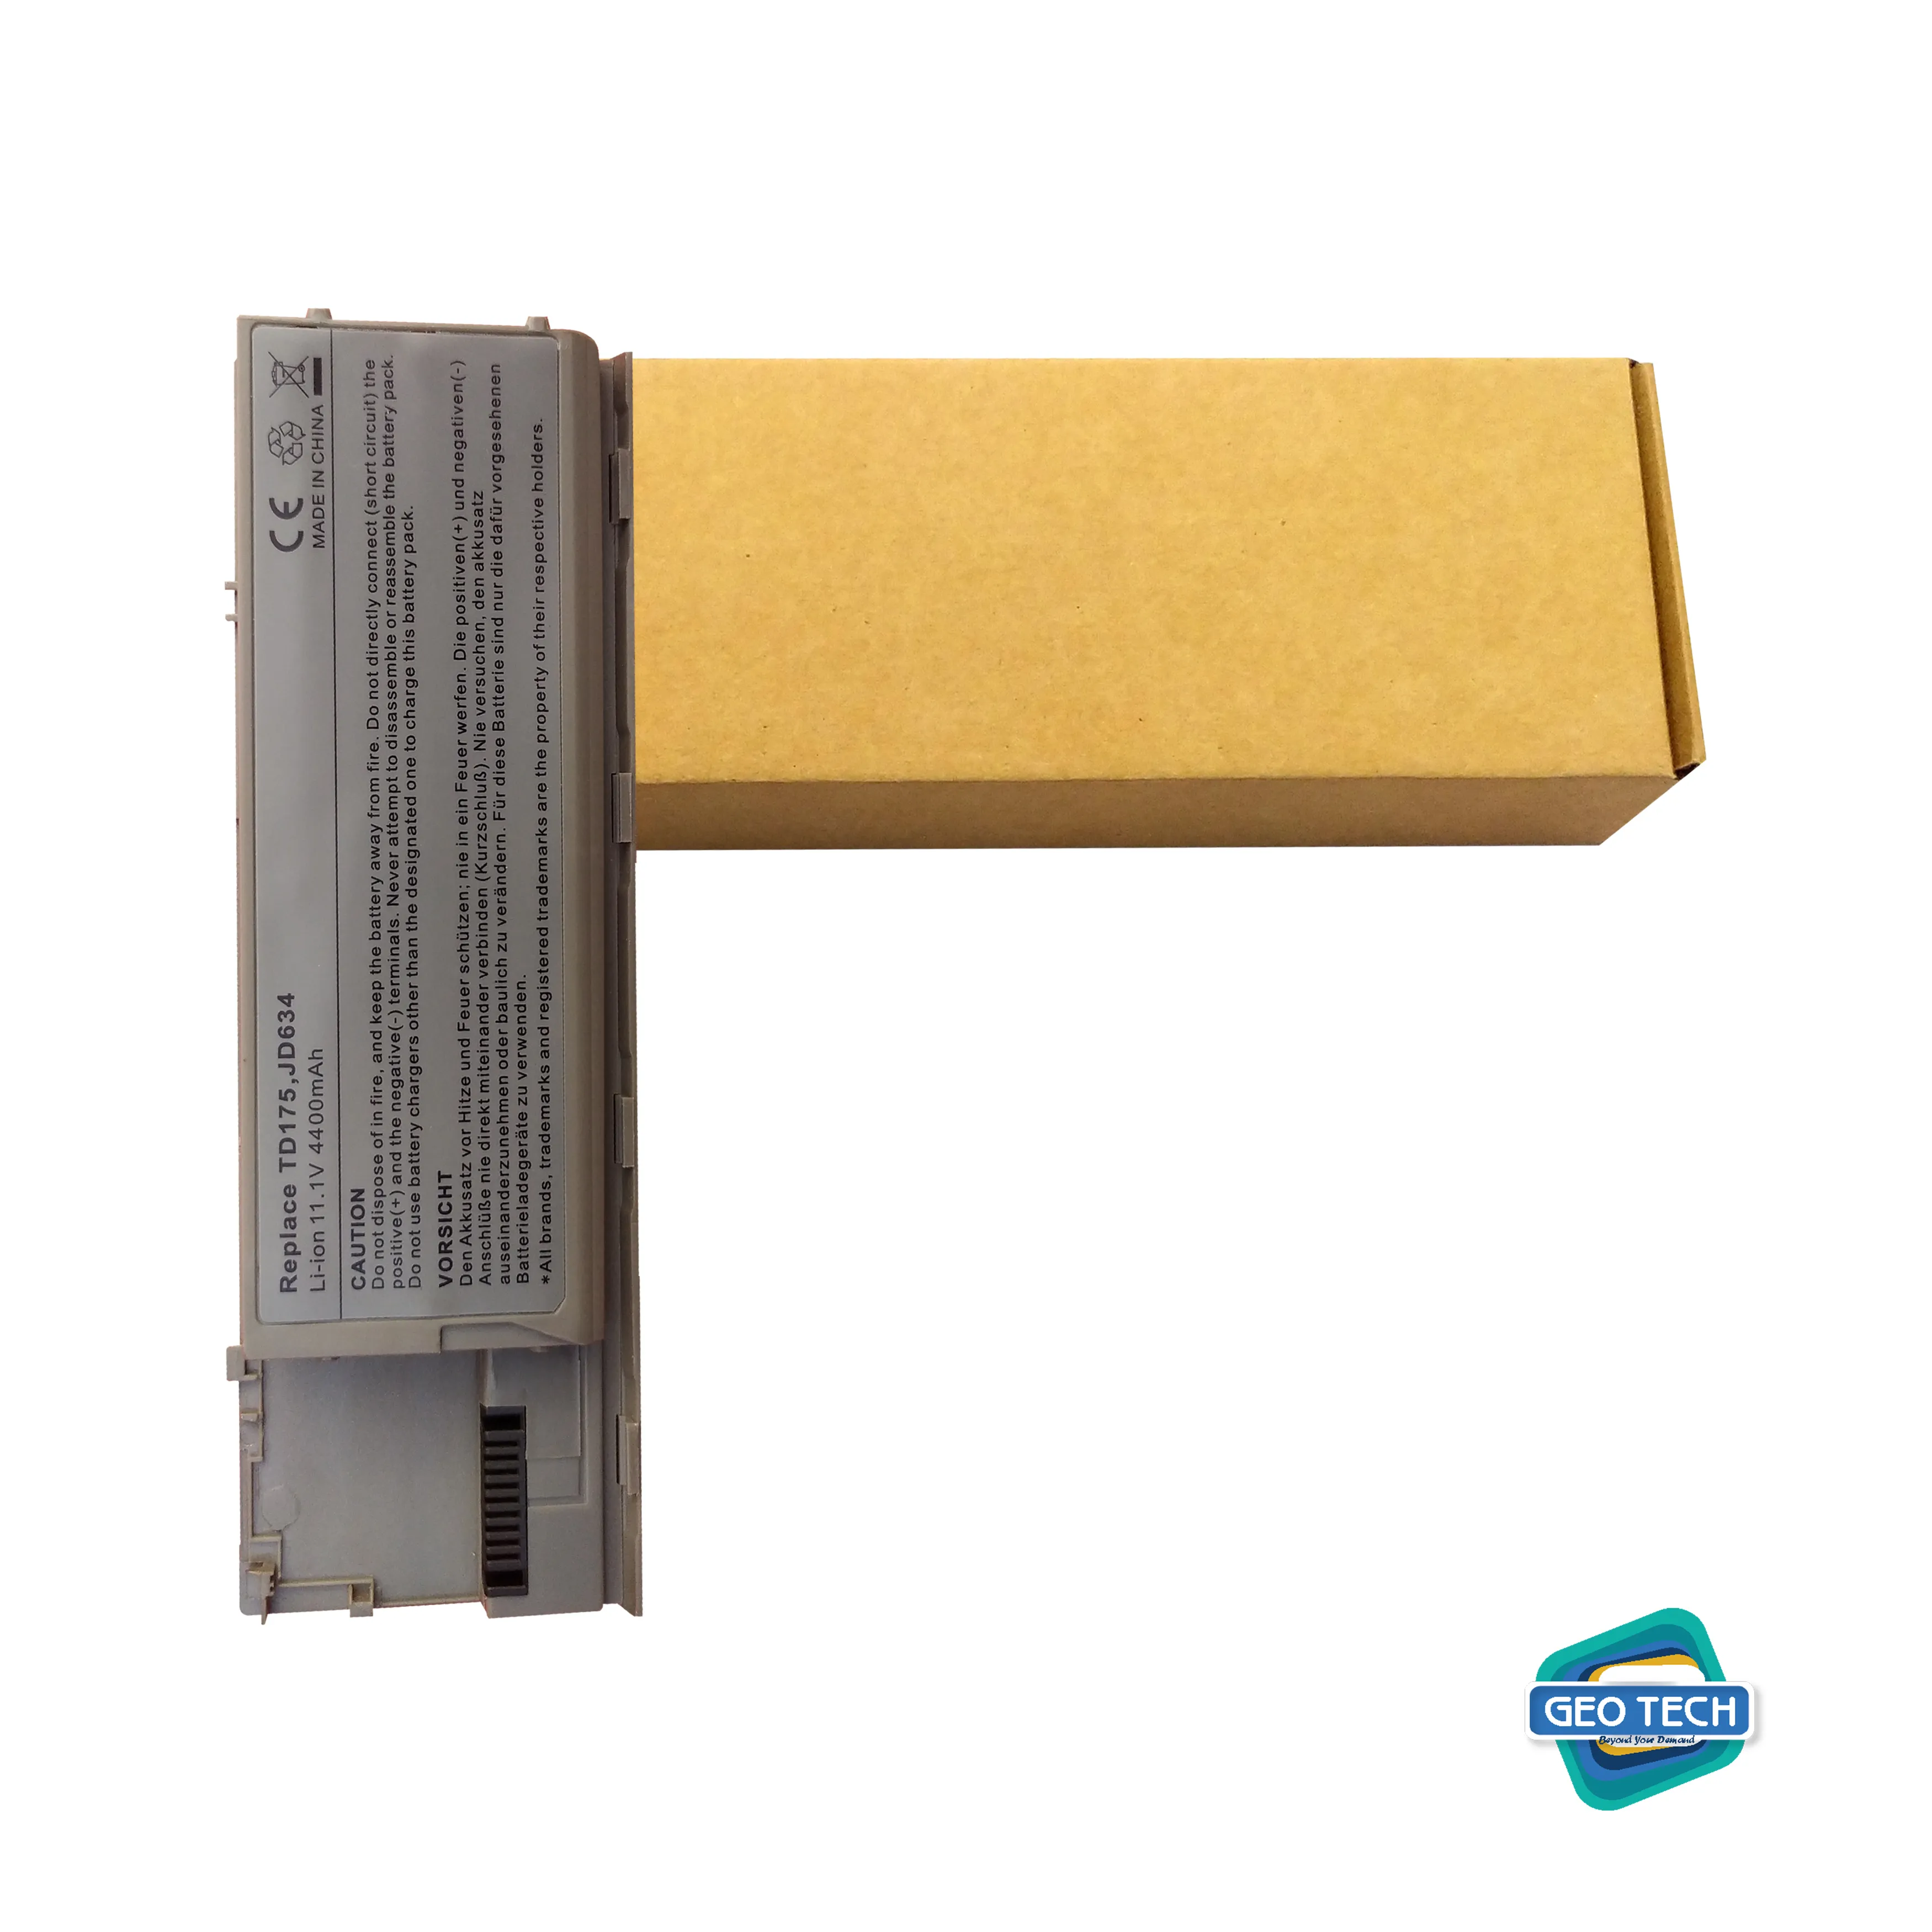 LAPTOP BATTERY FOR DELL D620